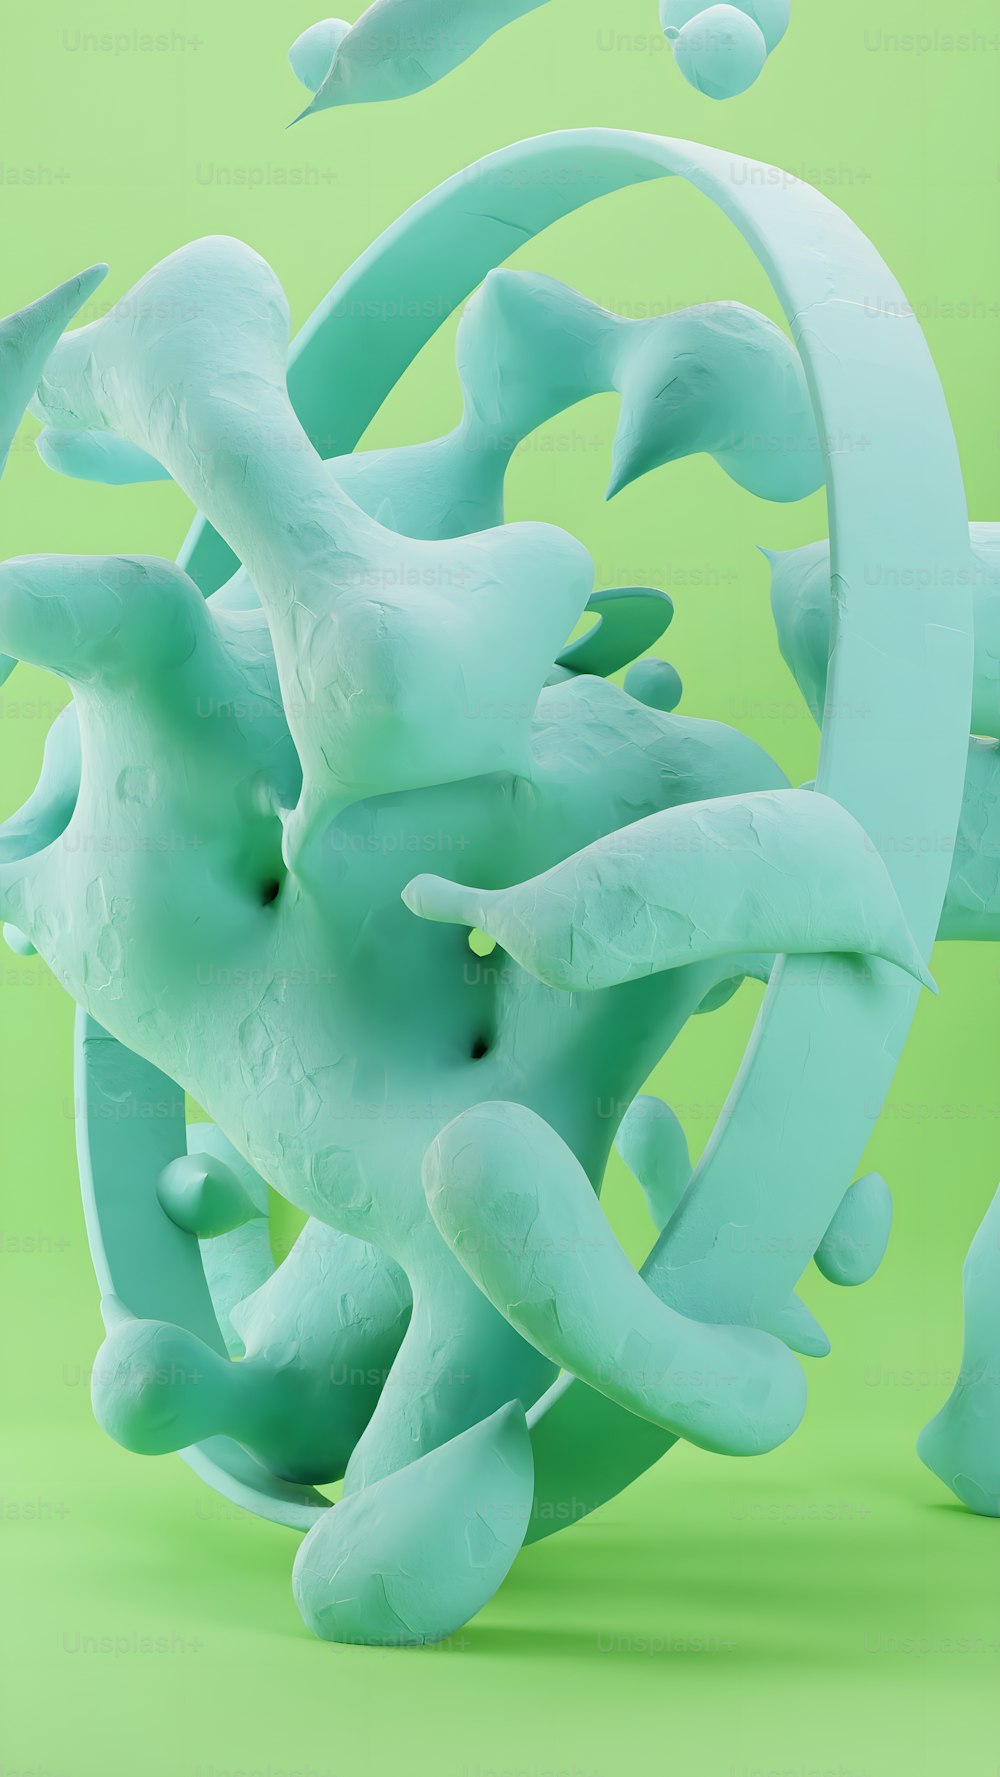 a sculpture made of plastic on a green background